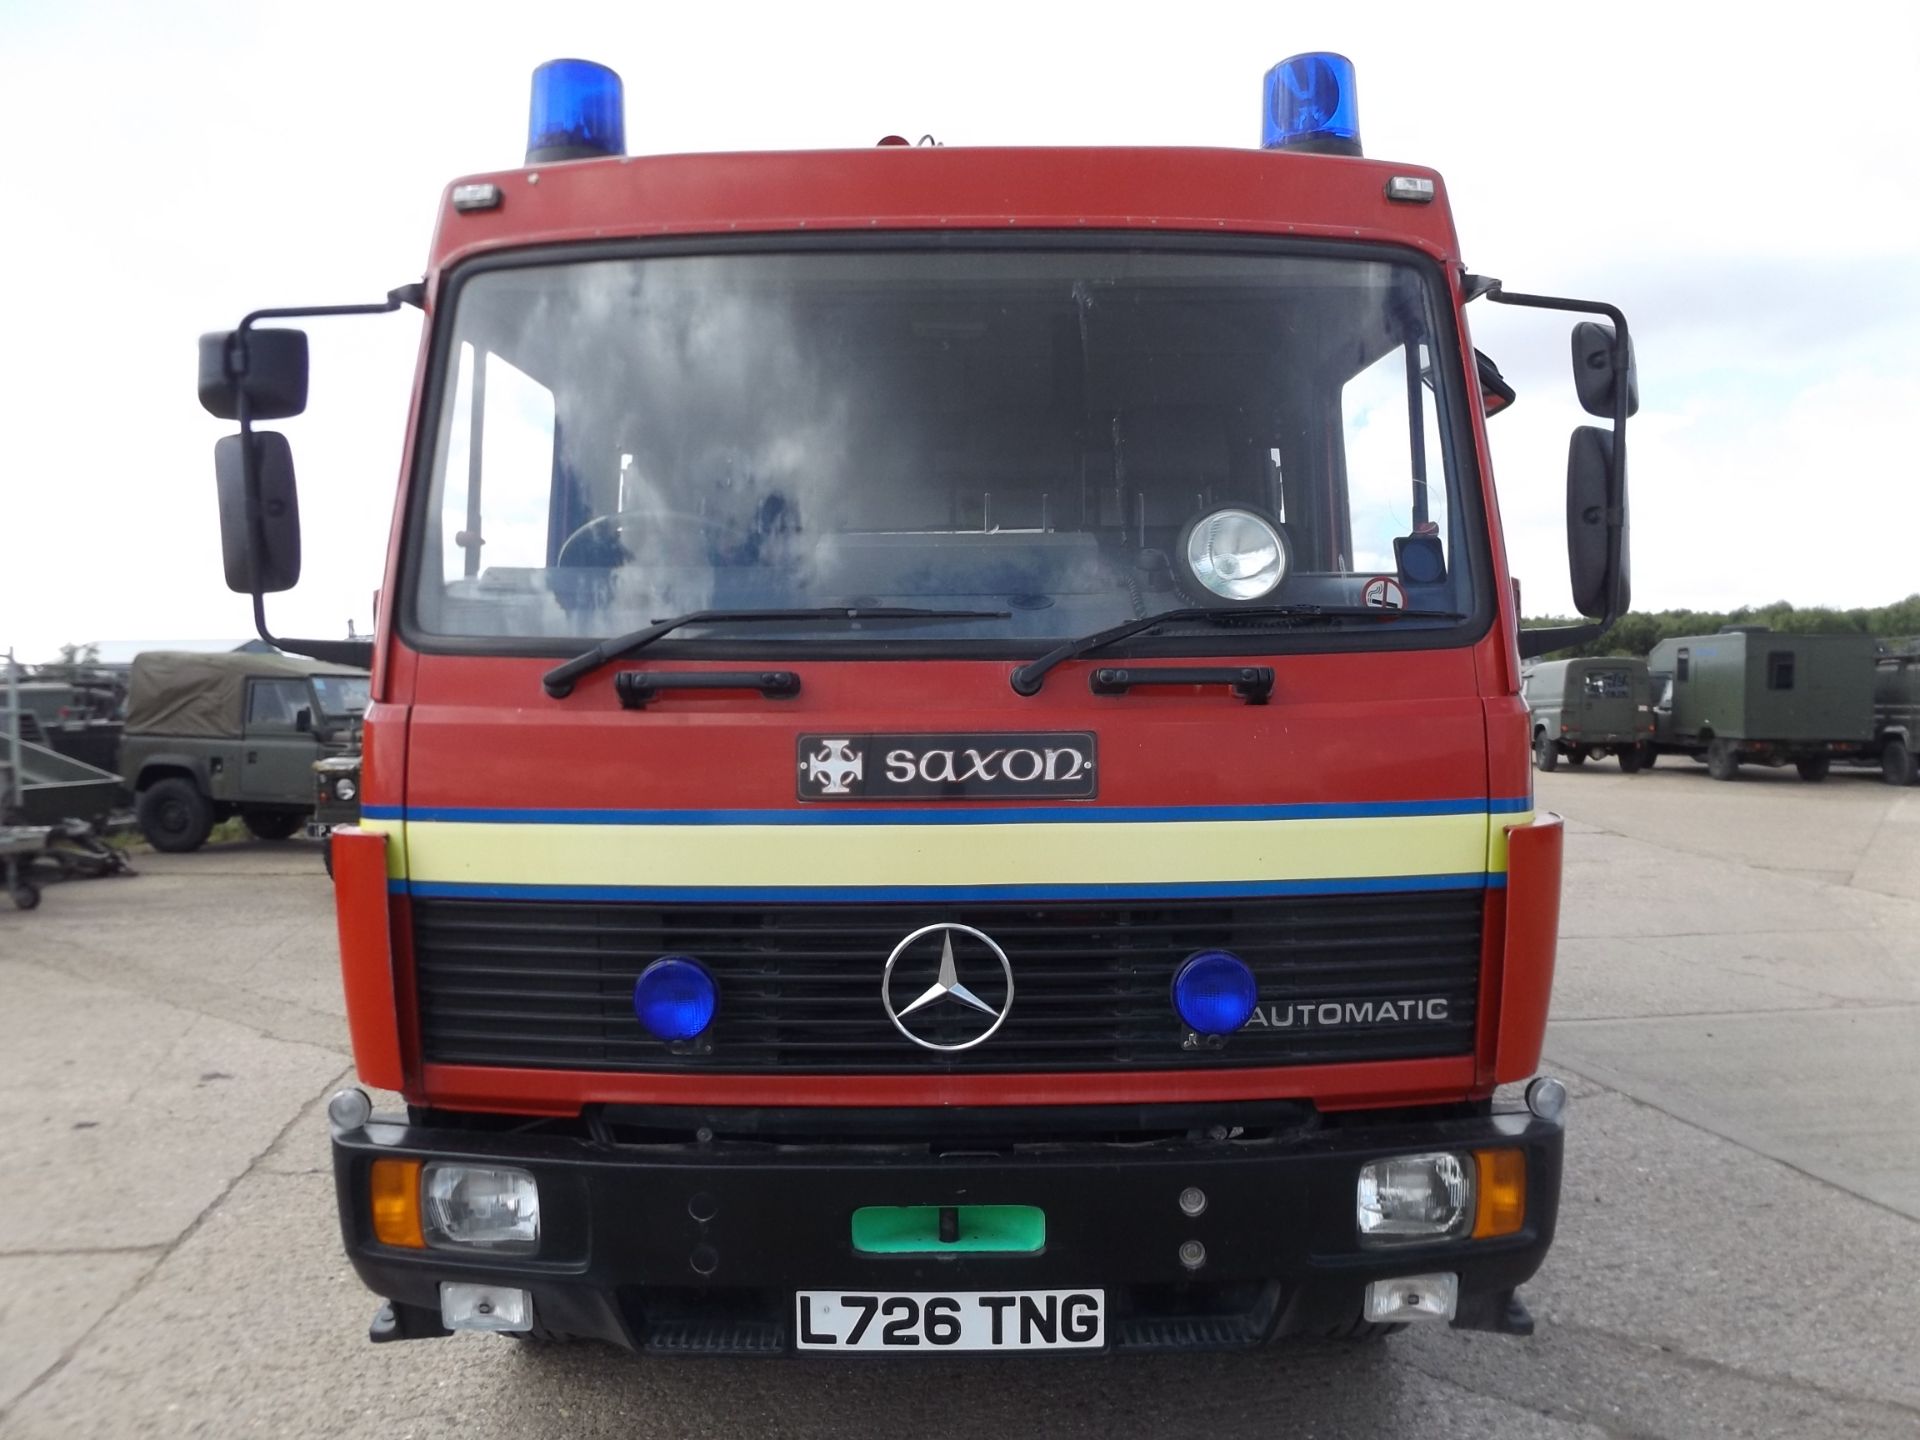 Mercedes 1124 Fire Engine - Image 2 of 16